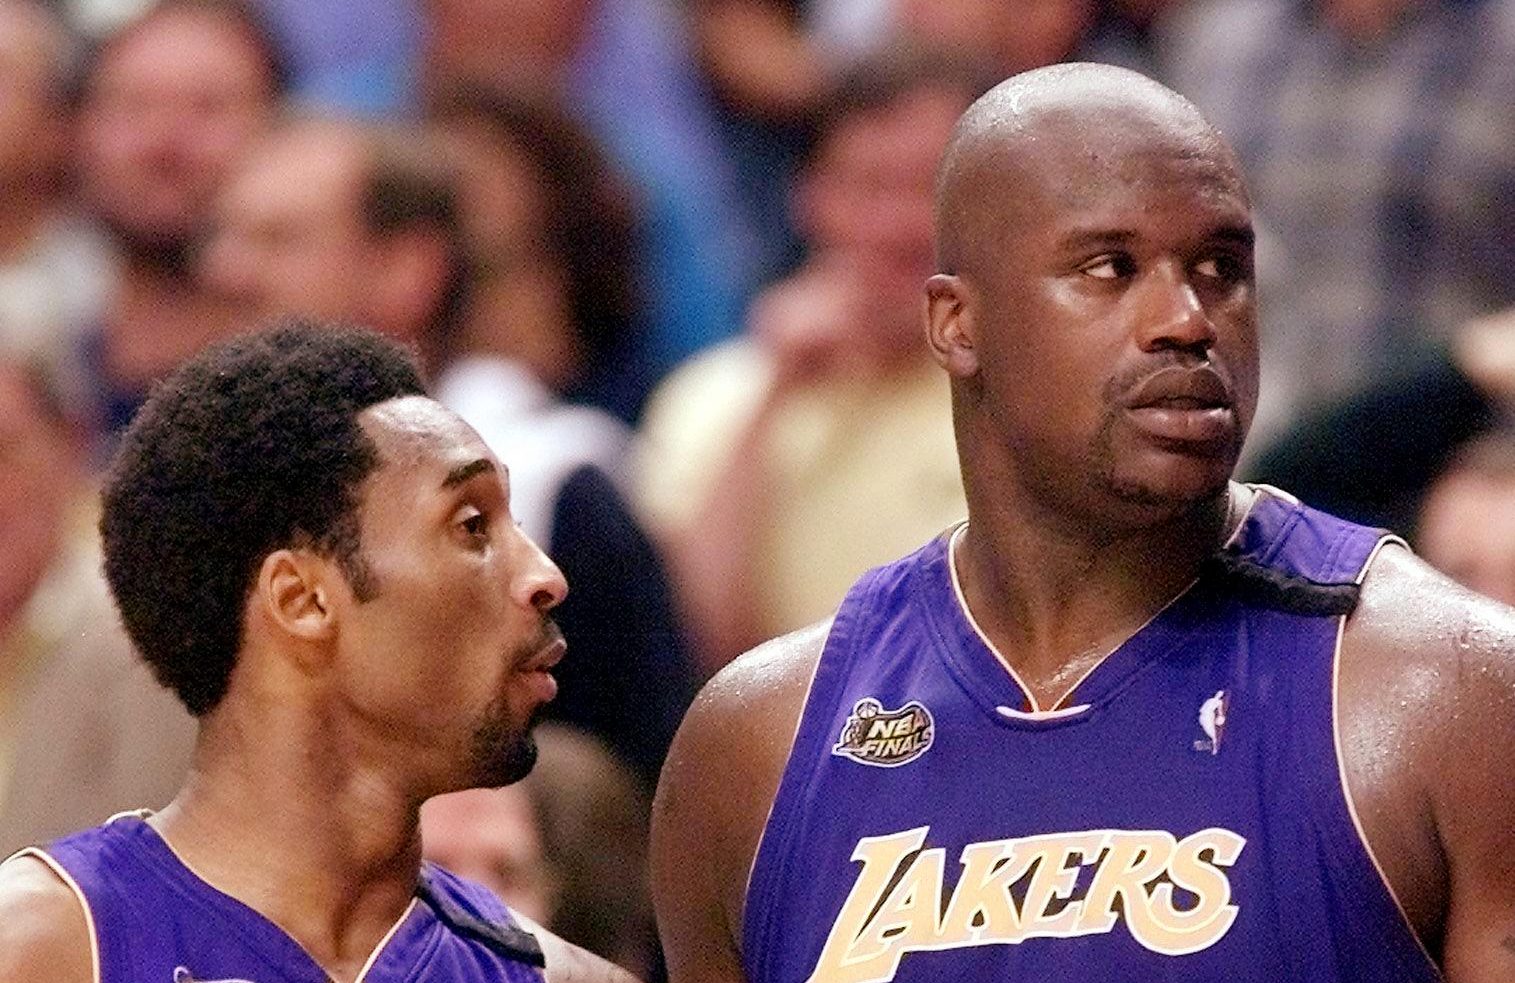 Kobe Bryant thinks he would own 12 rings if Shaq worked harder